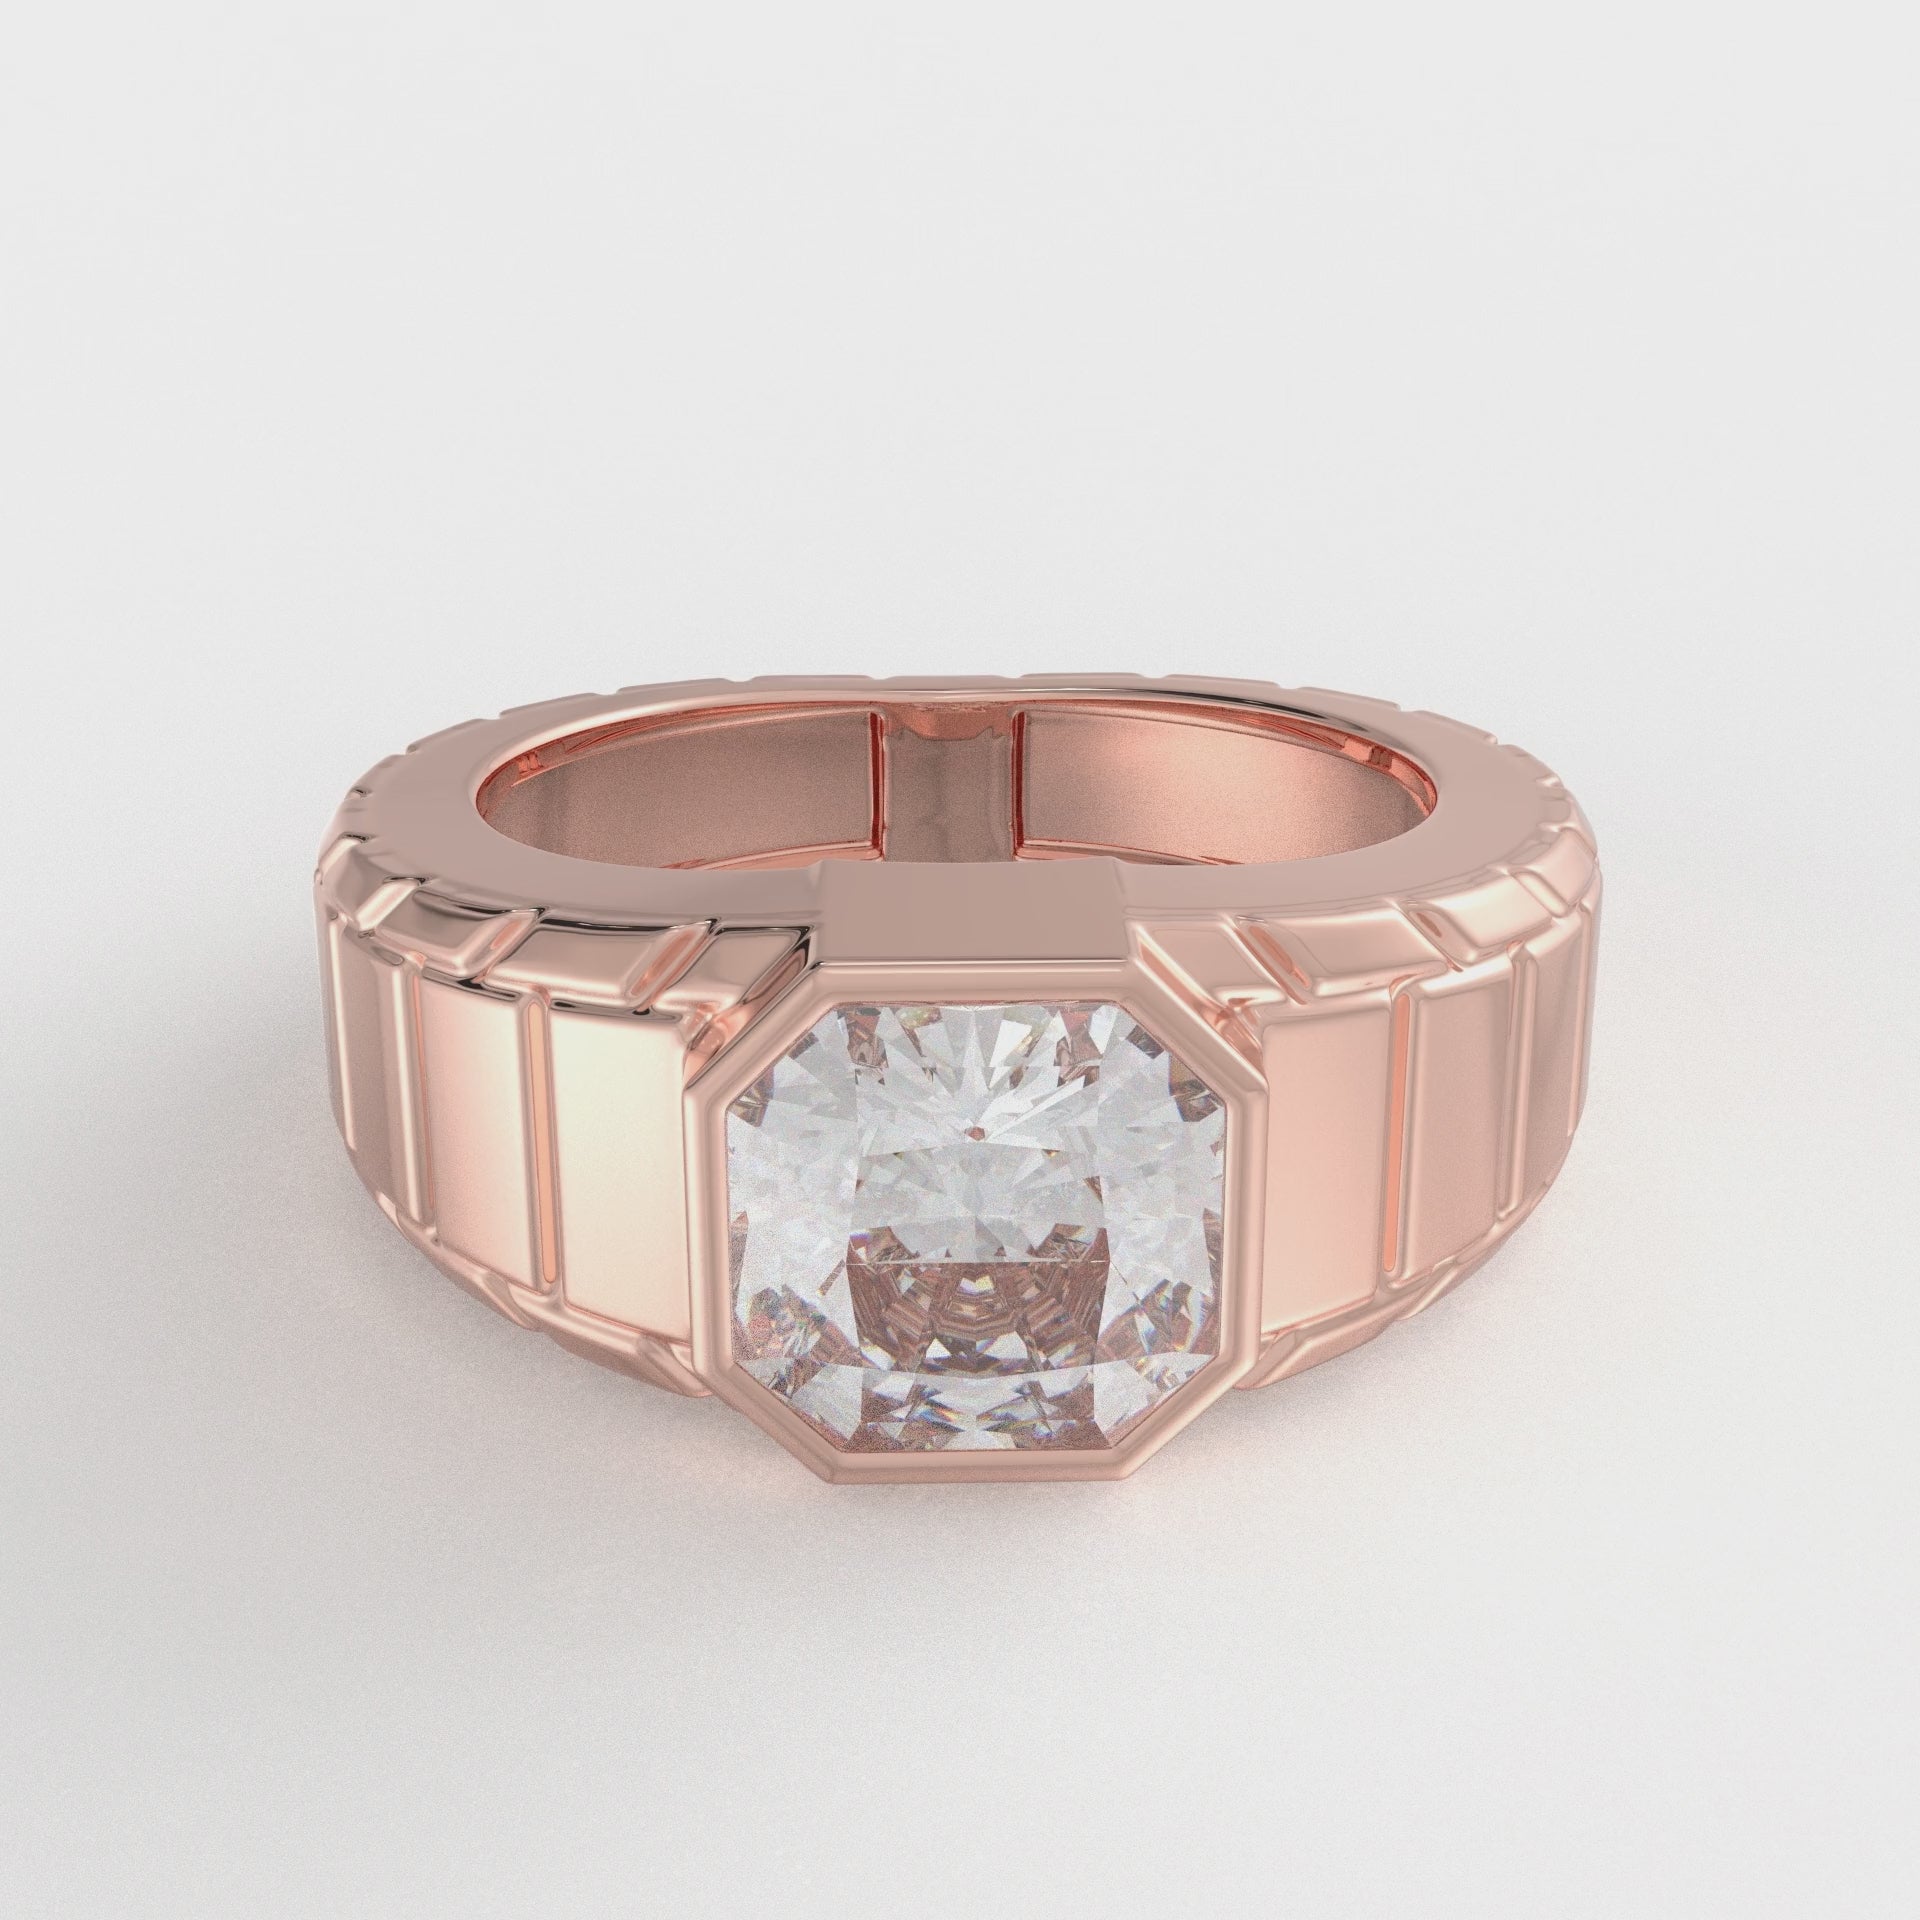 Men's Crystal Rose Gold Diamond Engagement Ring at Rs 45000 in Surat